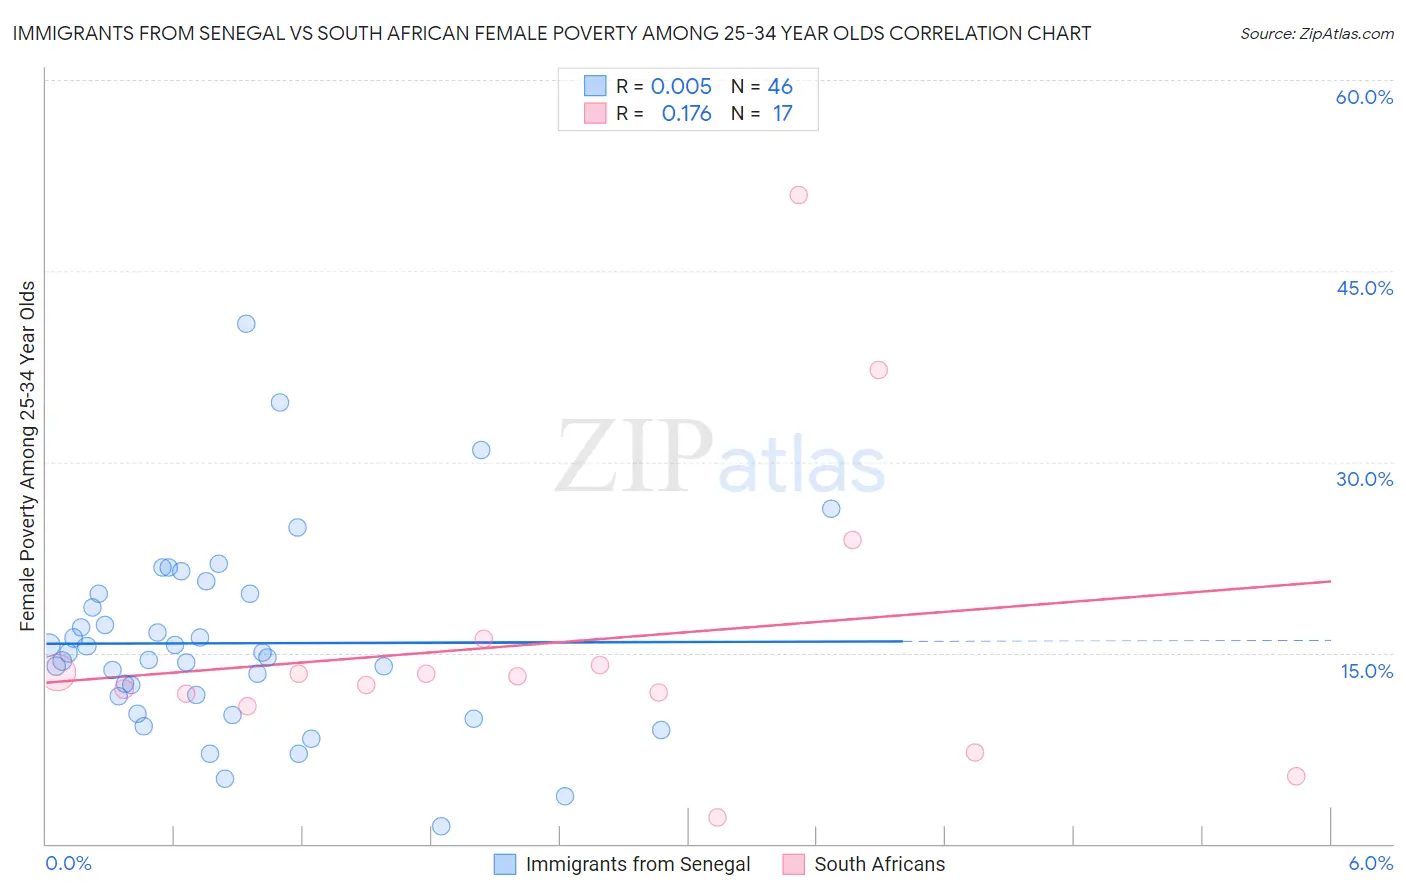 Immigrants from Senegal vs South African Female Poverty Among 25-34 Year Olds